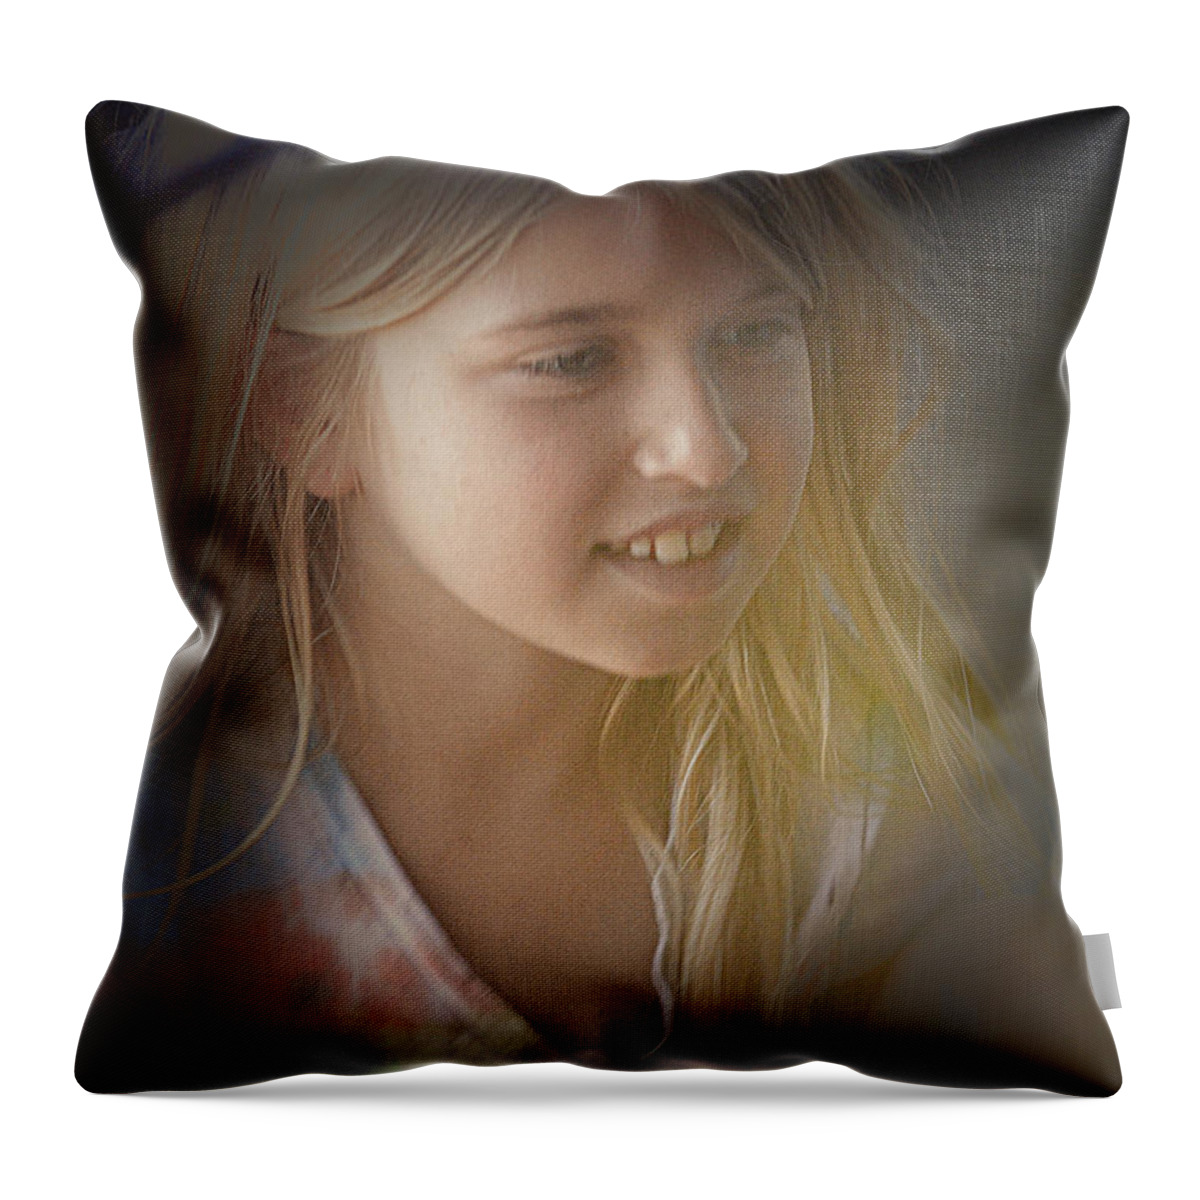 Girl Throw Pillow featuring the photograph Young Girl by Lori Seaman